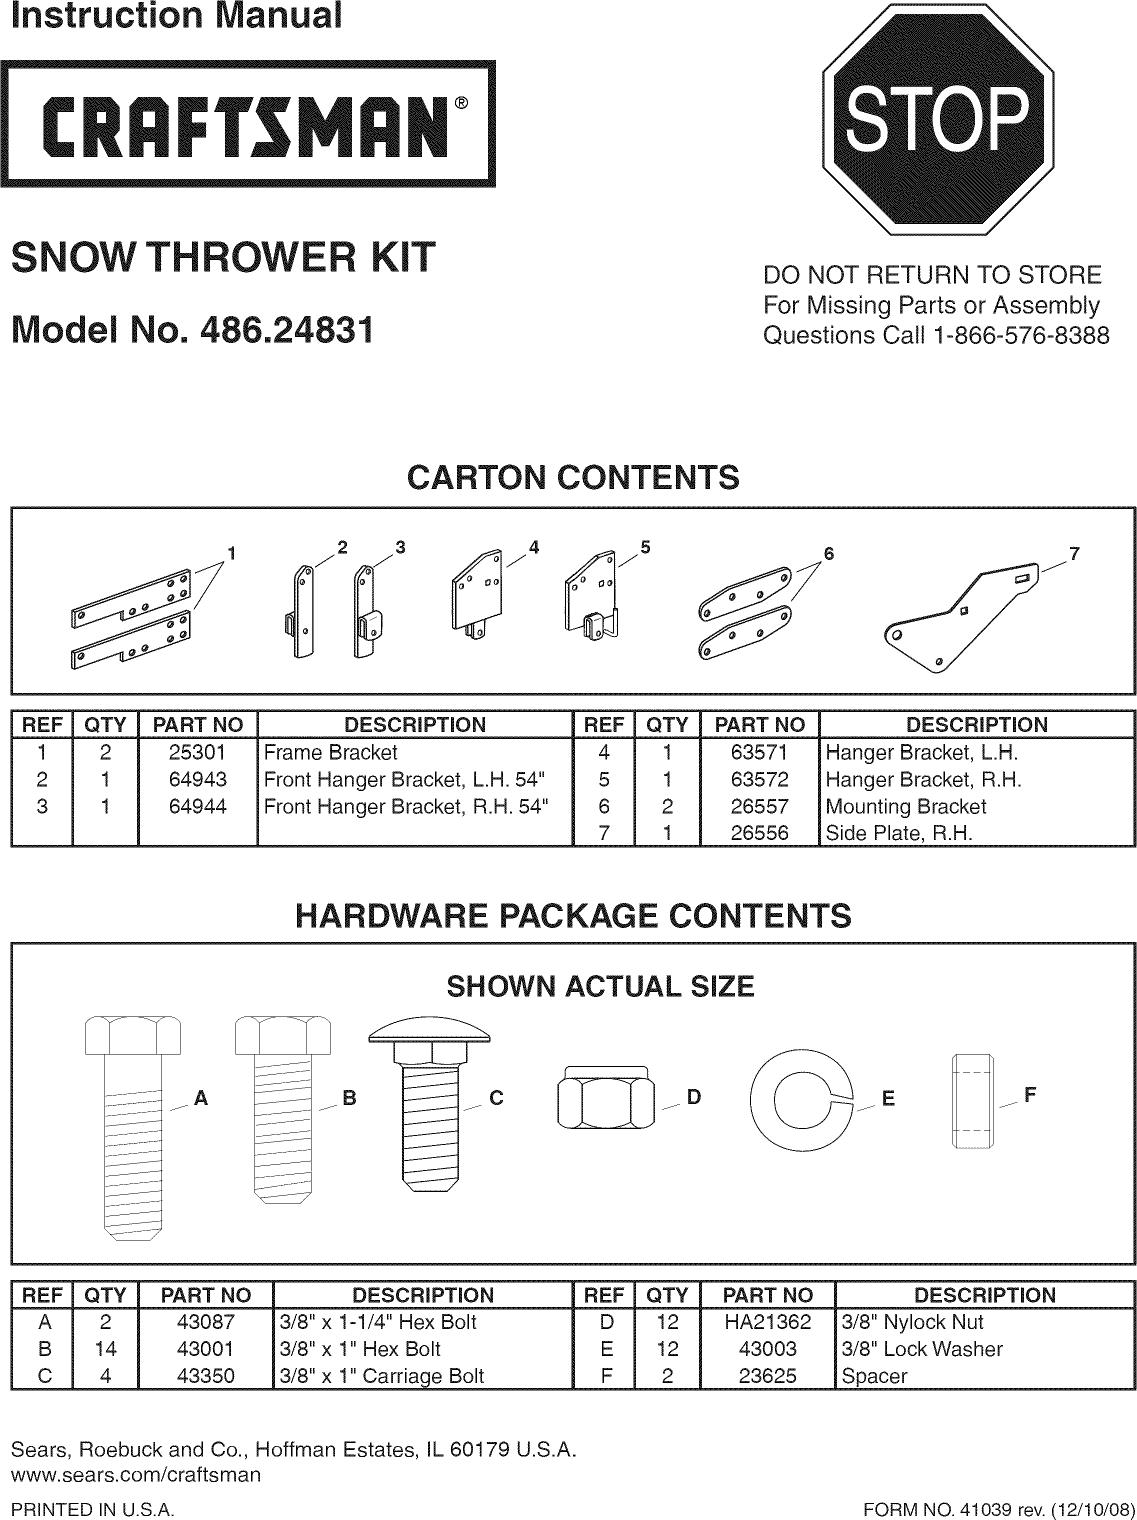 Page 1 of 8 - Craftsman 48624831 User Manual  SNOW THROWER - Manuals And Guides L0904376